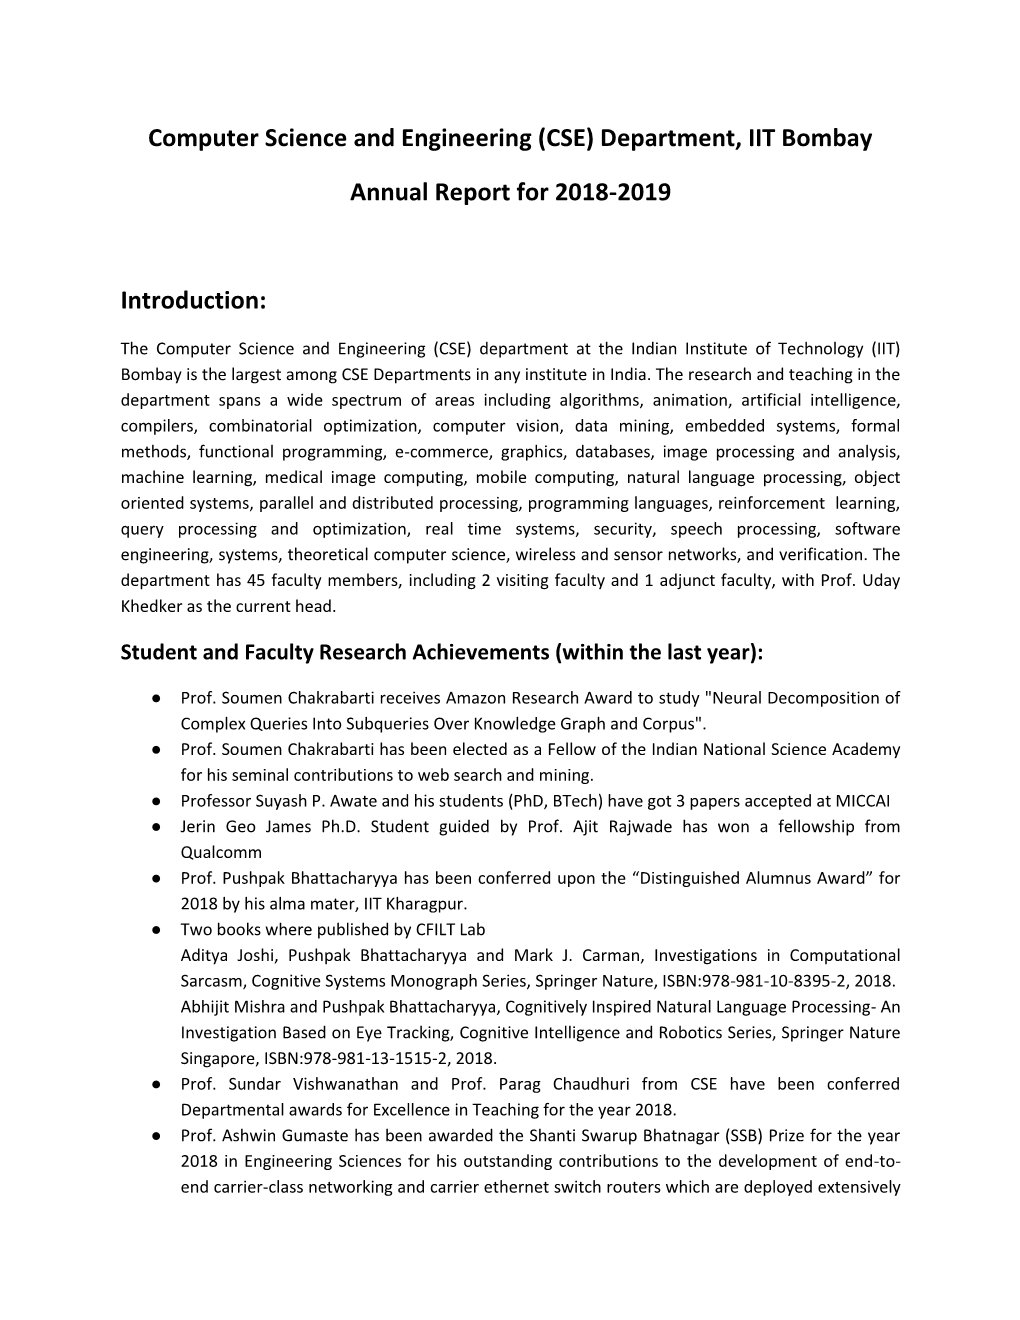 (CSE) Department, IIT Bombay Annual Report for 2018-2019 Introduction